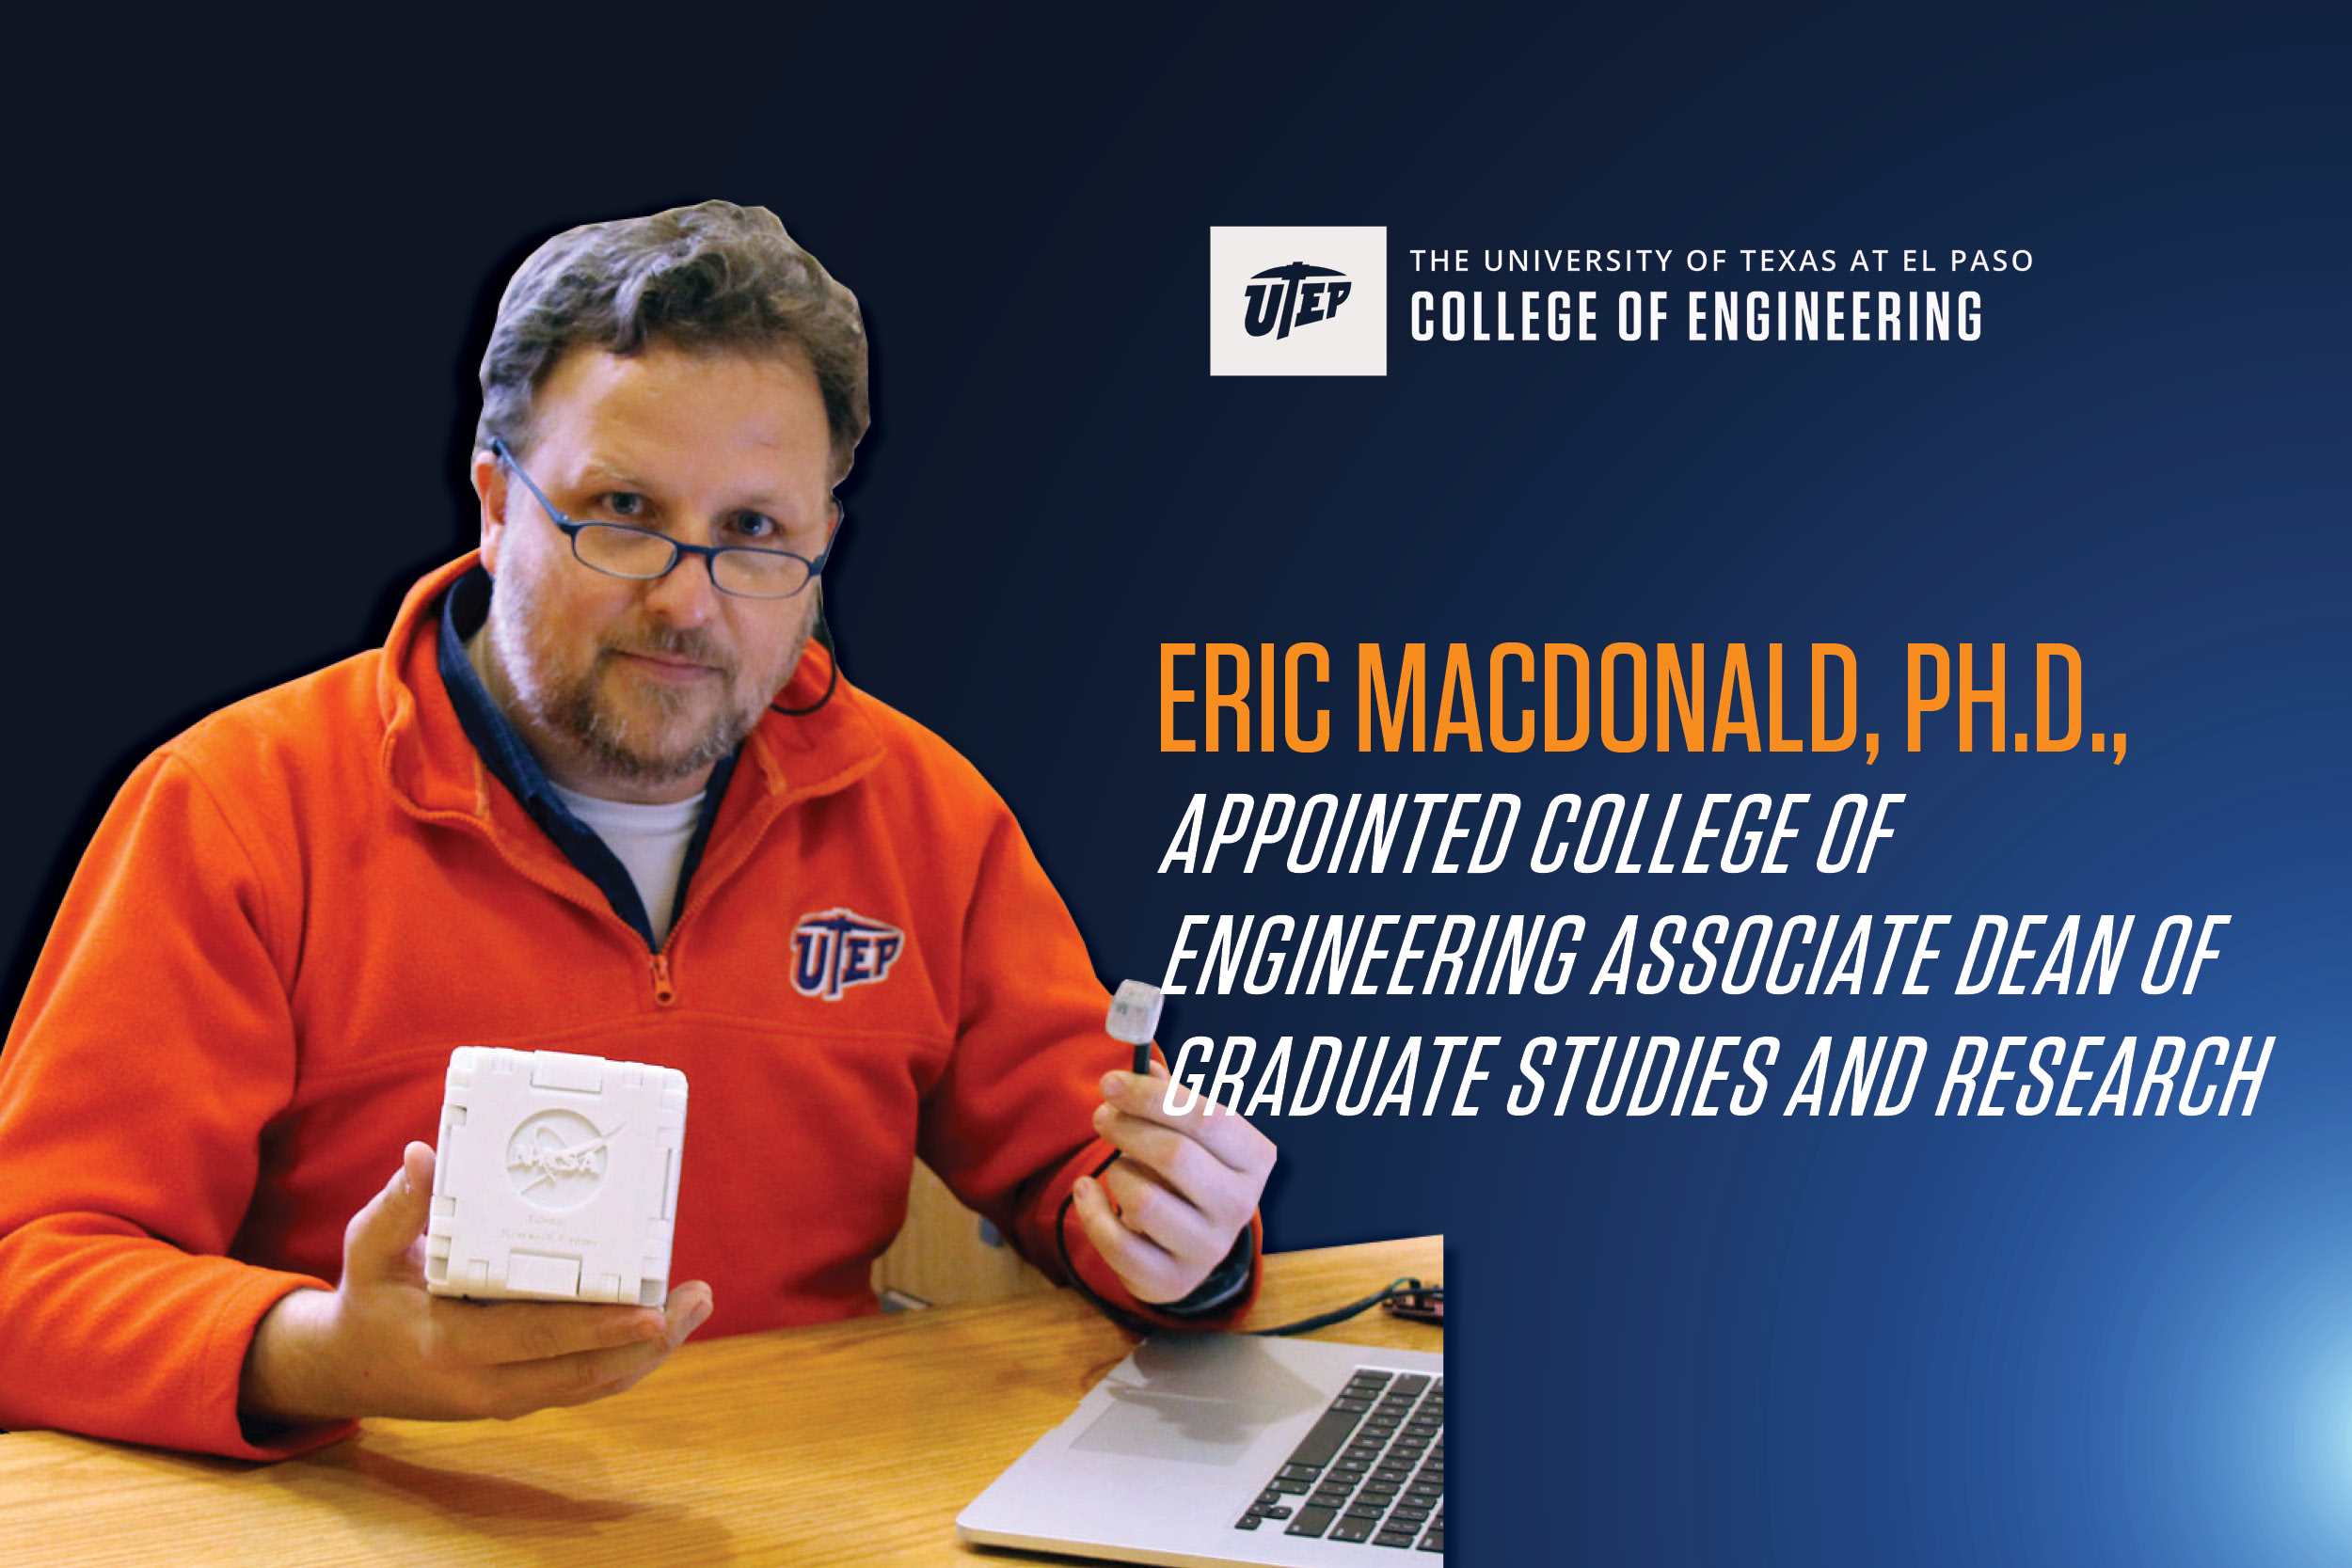 Eric MacDonald Appointed College of Engineering Associate Dean of Graduate Studies and Research